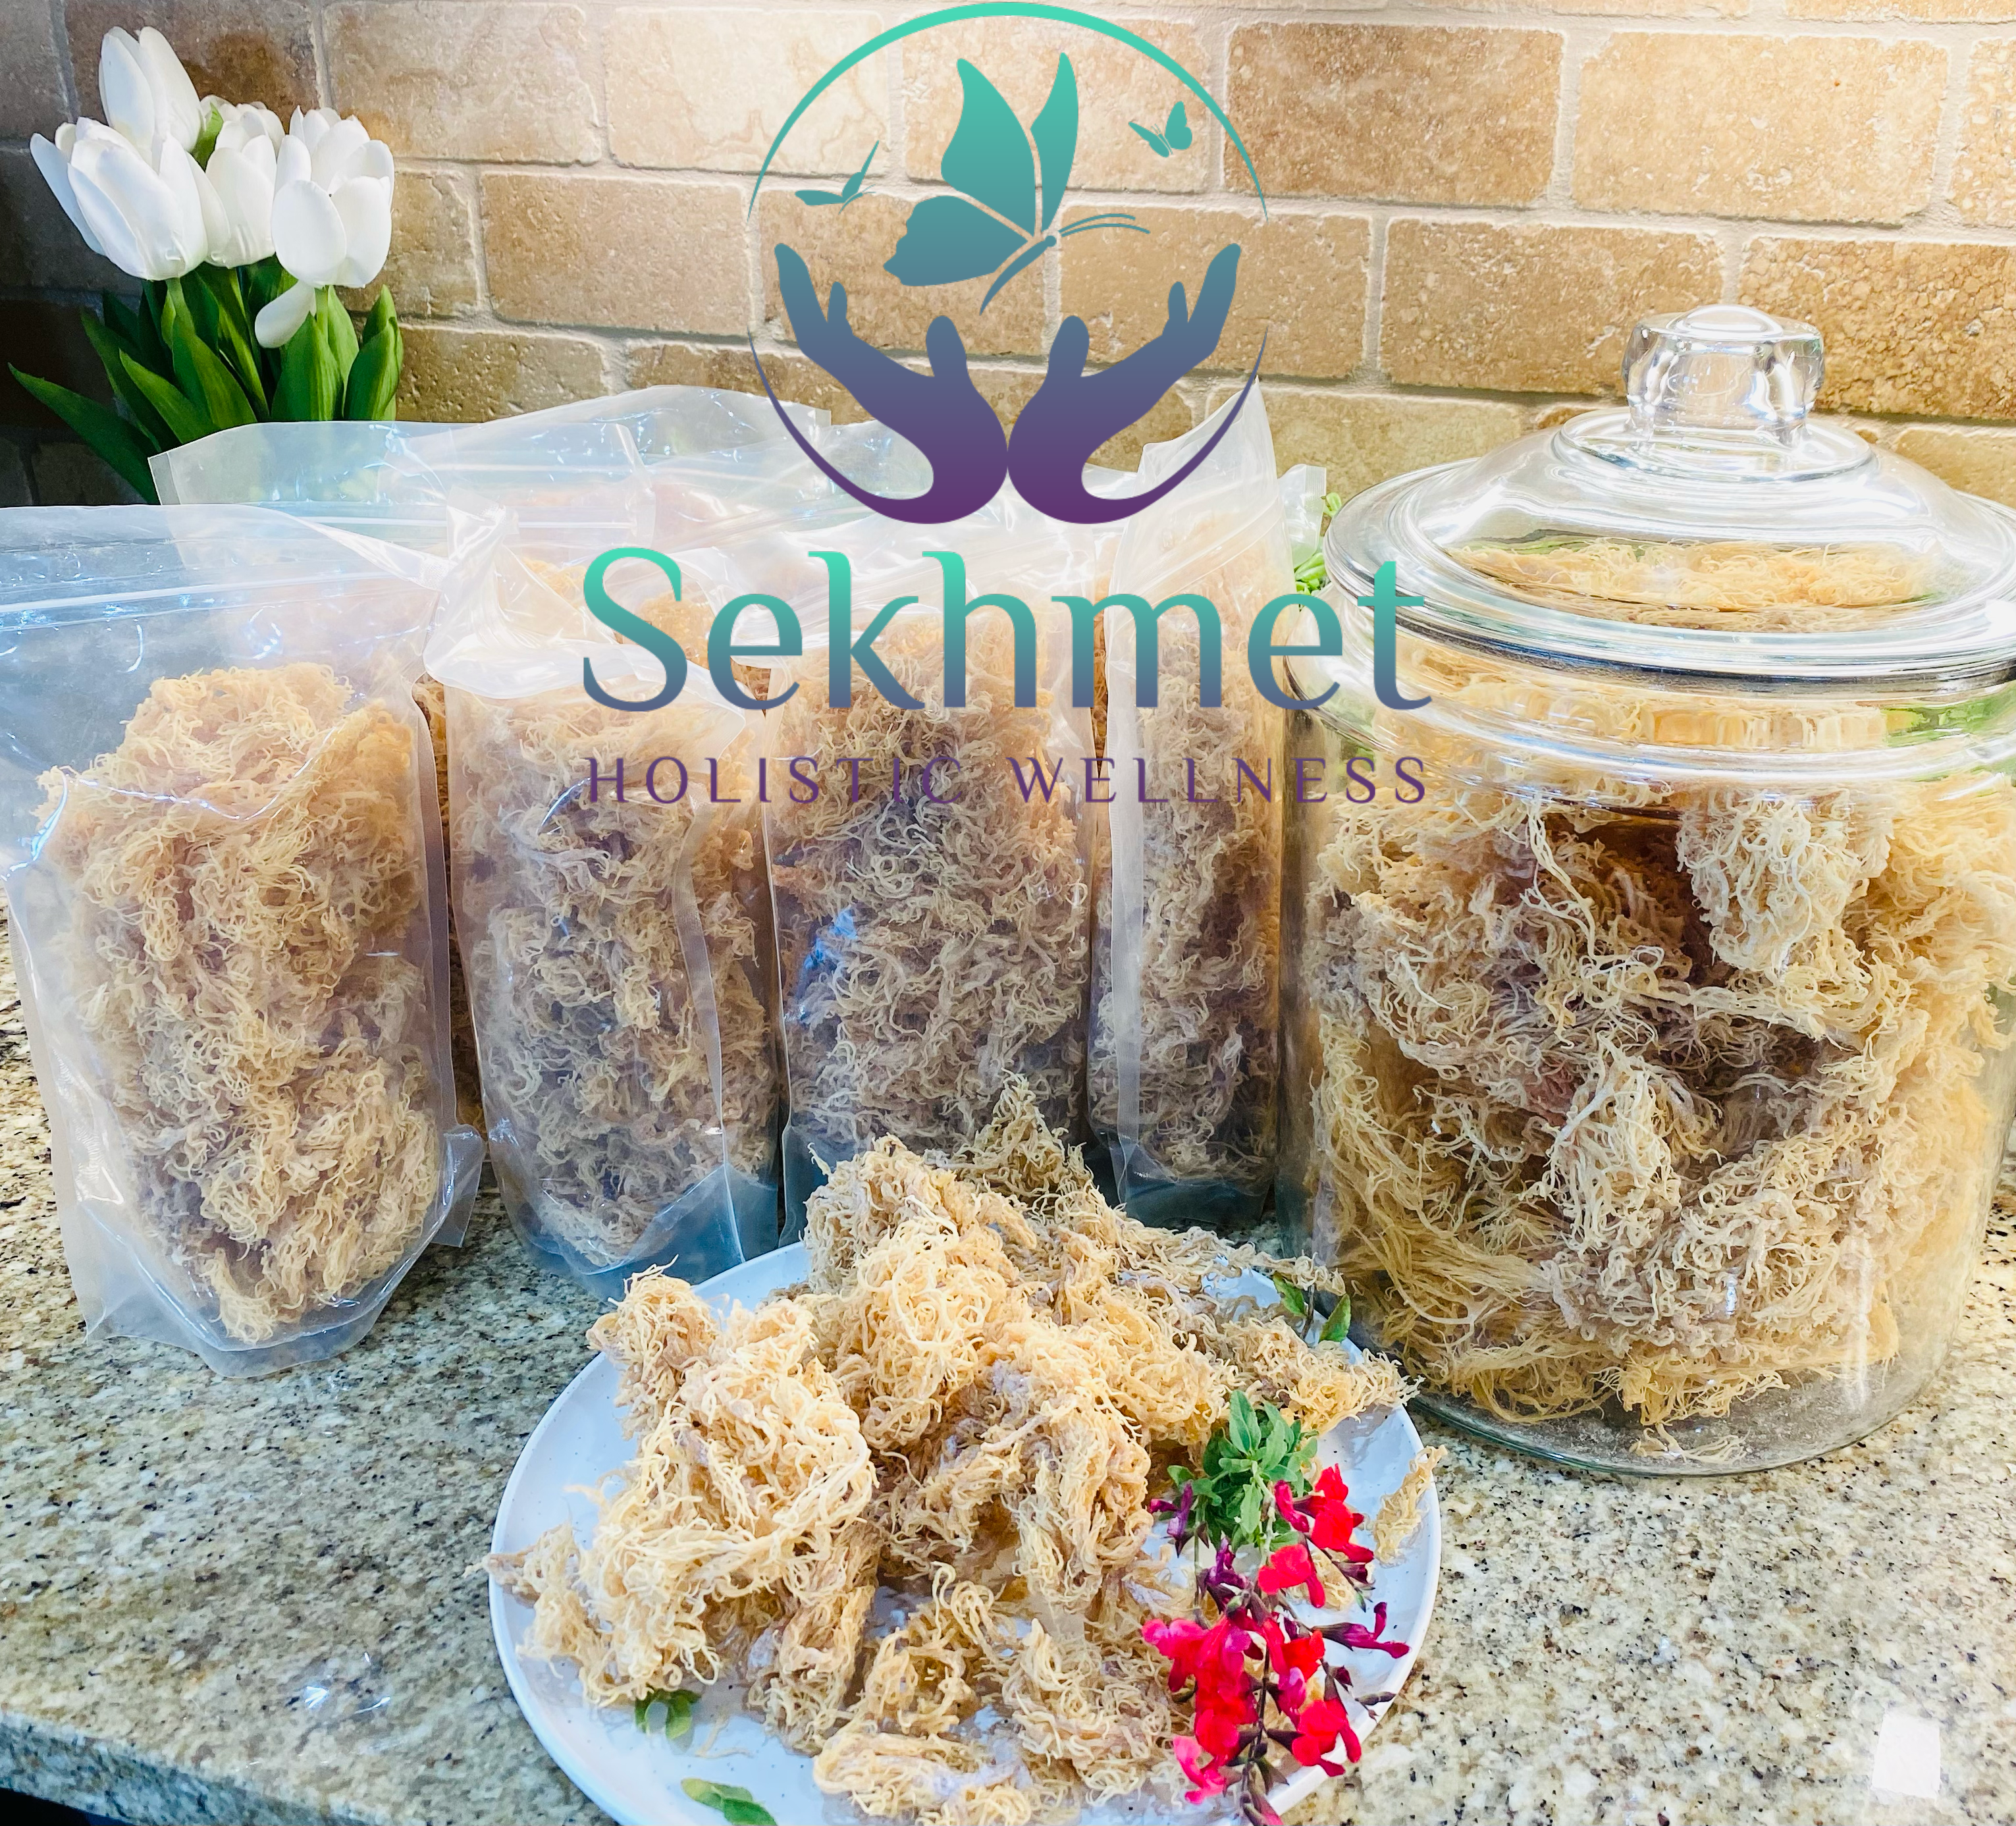 Sekhmet’s Seamoss benefits: supports healthy immune system, helps support libido and stamina, helps soften and dissolve hardened mucus, boosts mental health and energy, digestion support and much more!